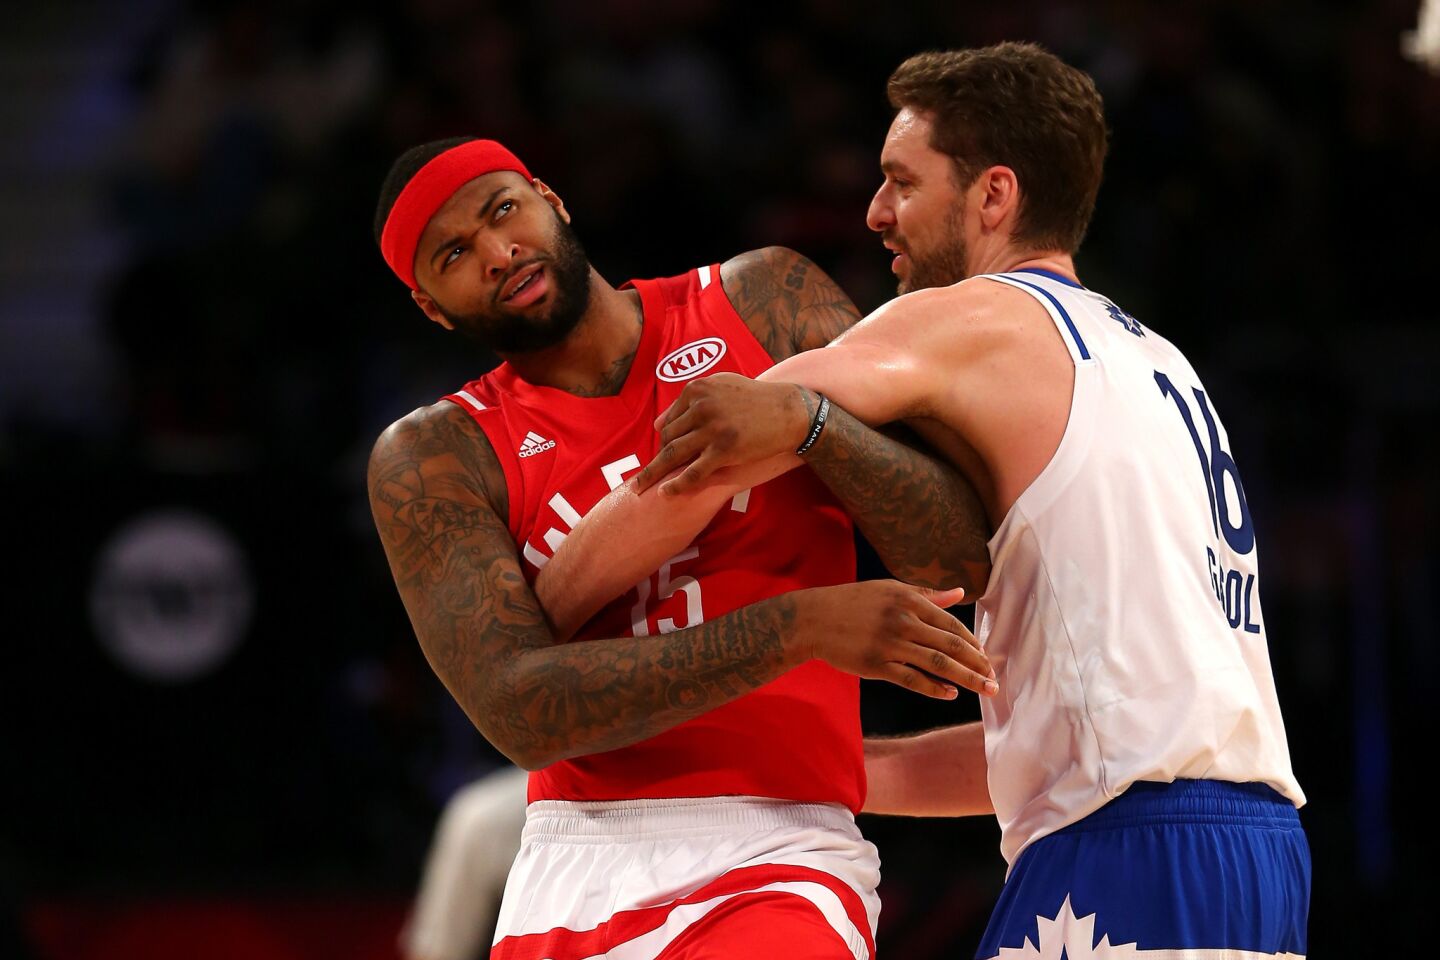 Bulls center Pau Gasol of the East gets tangled with Kings center DeMarcus Cousins during first-half action.